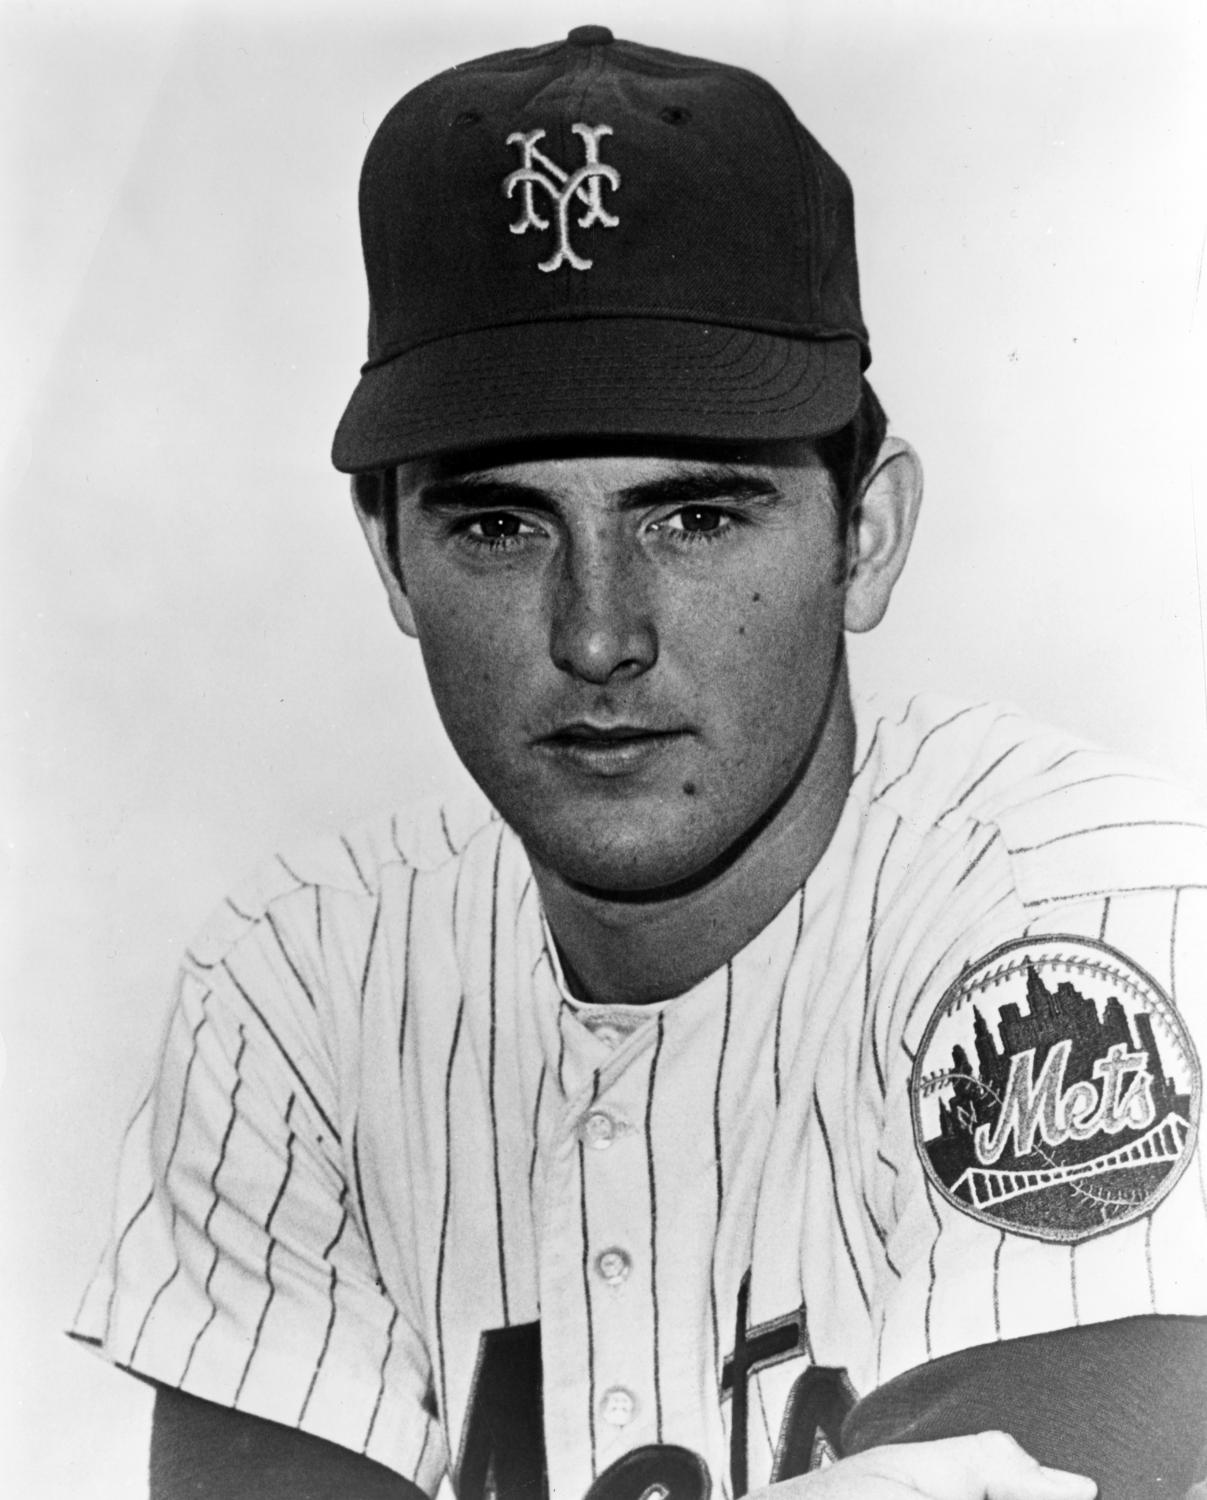 Happy birthday to Nolan Ryan, who won his only World Series ring with the Mets 